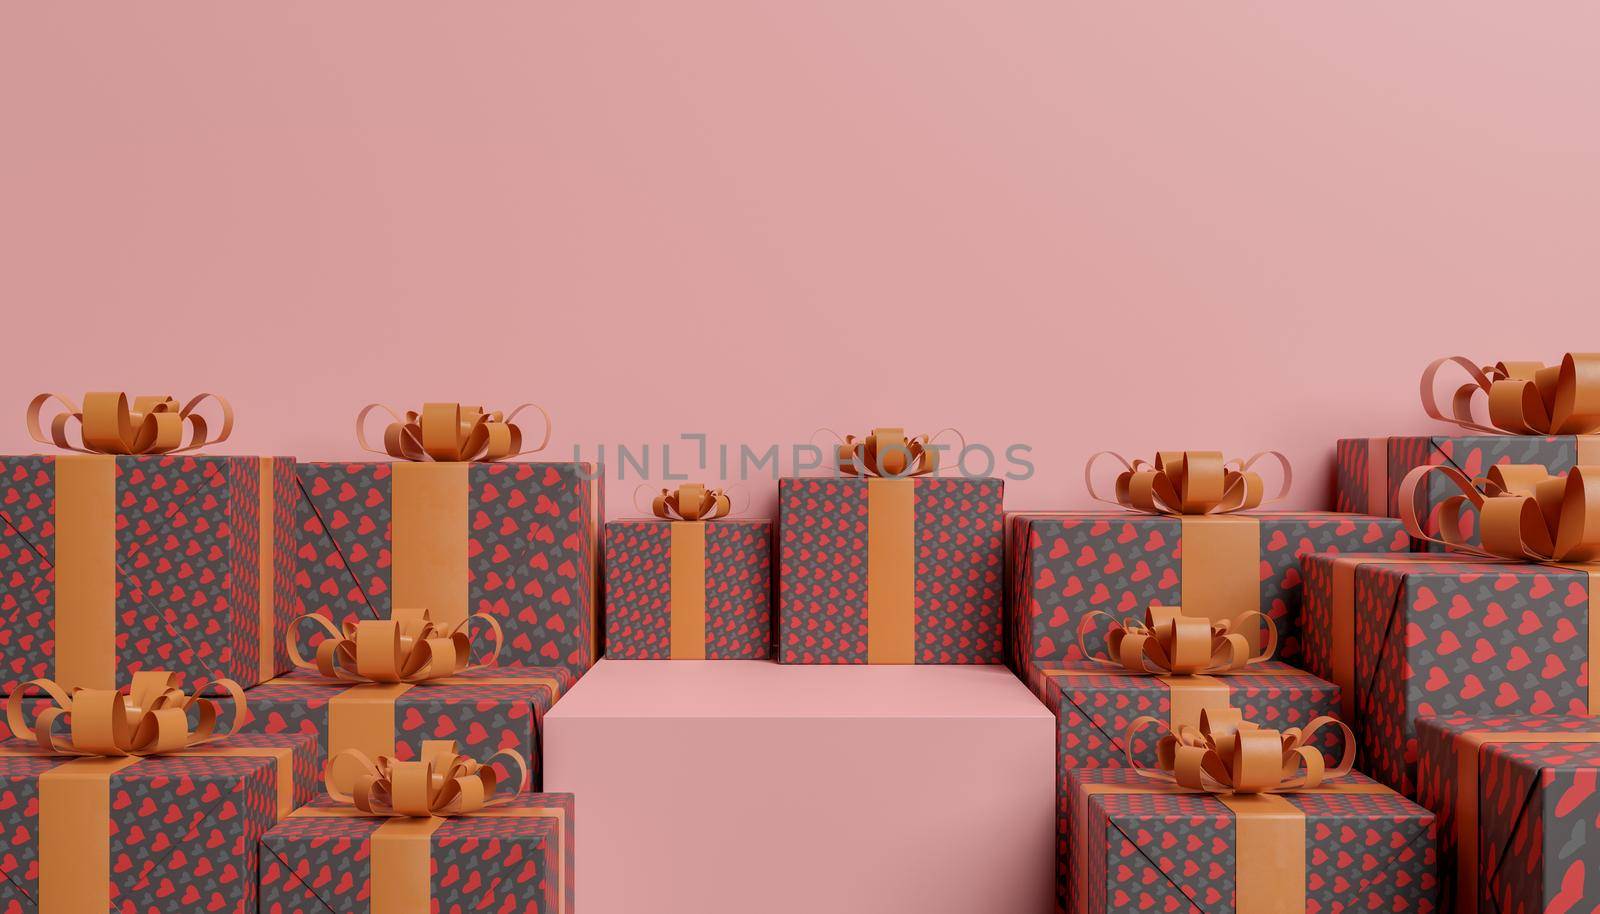 product stand with gifts decorated with hearts by asolano